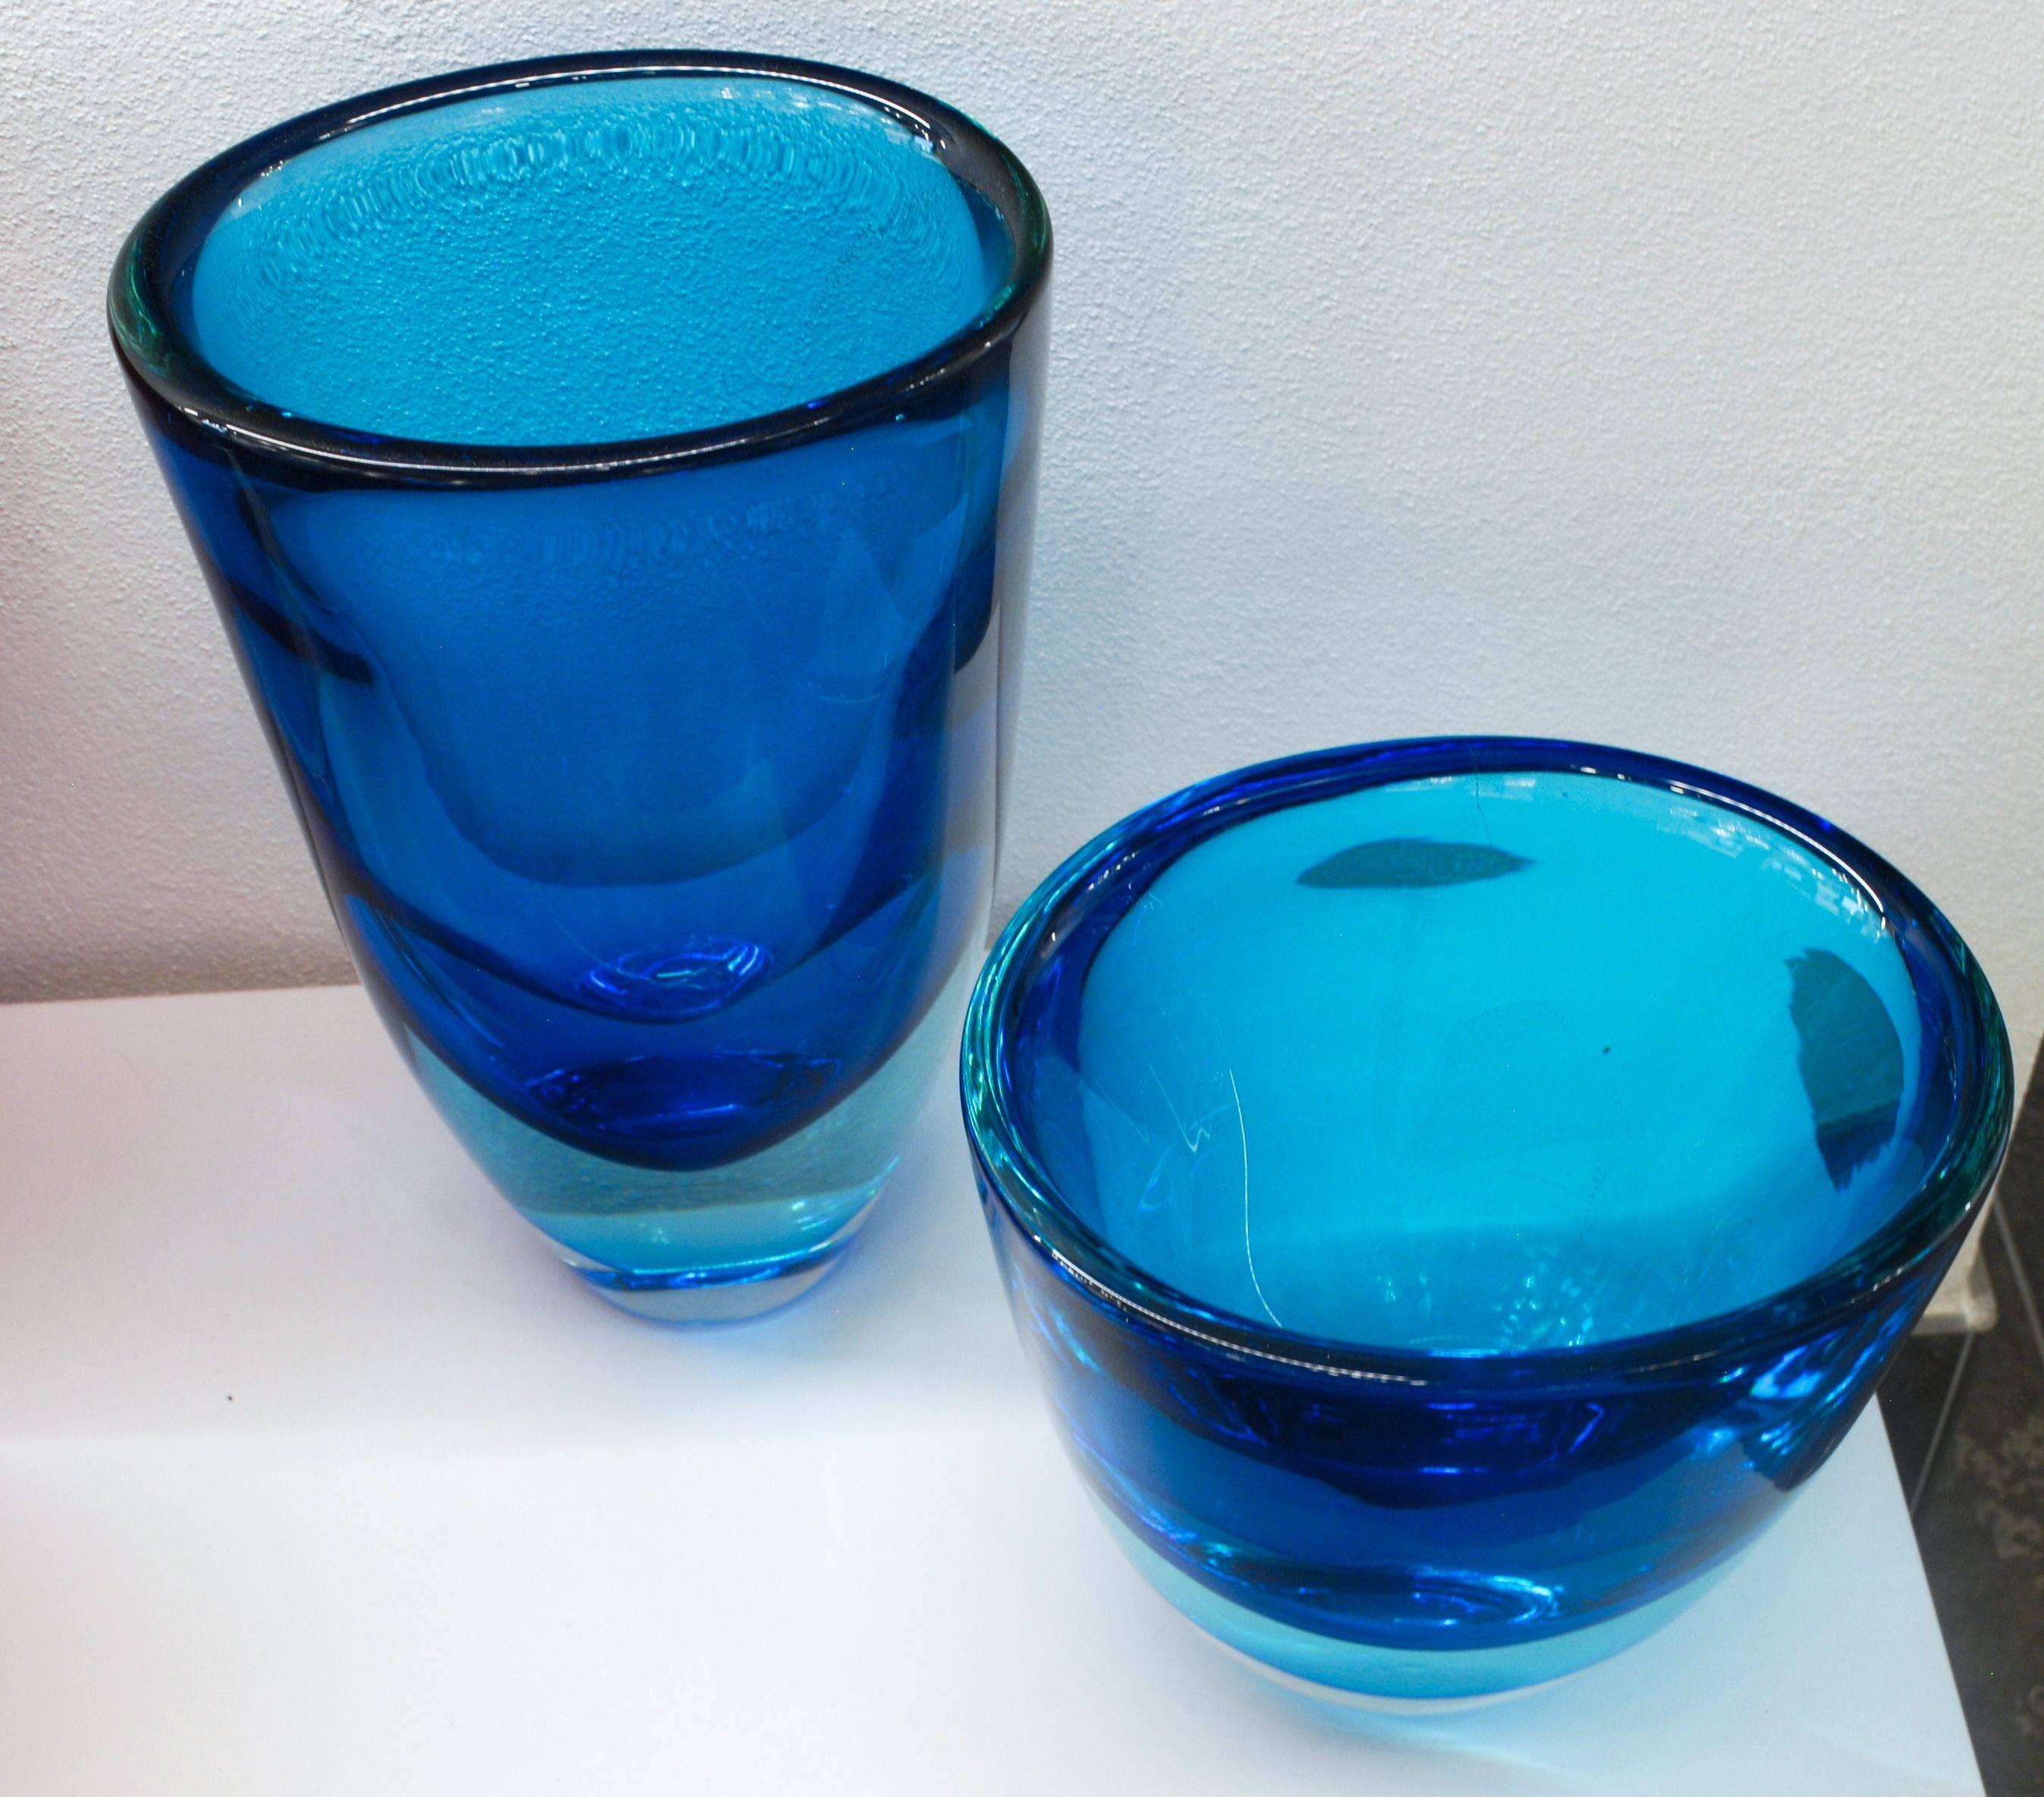 Late 20th Century Stefano Toso Pair of Sommerso Acquamare and Cobalt Vases, Massiccio with Sbruffi